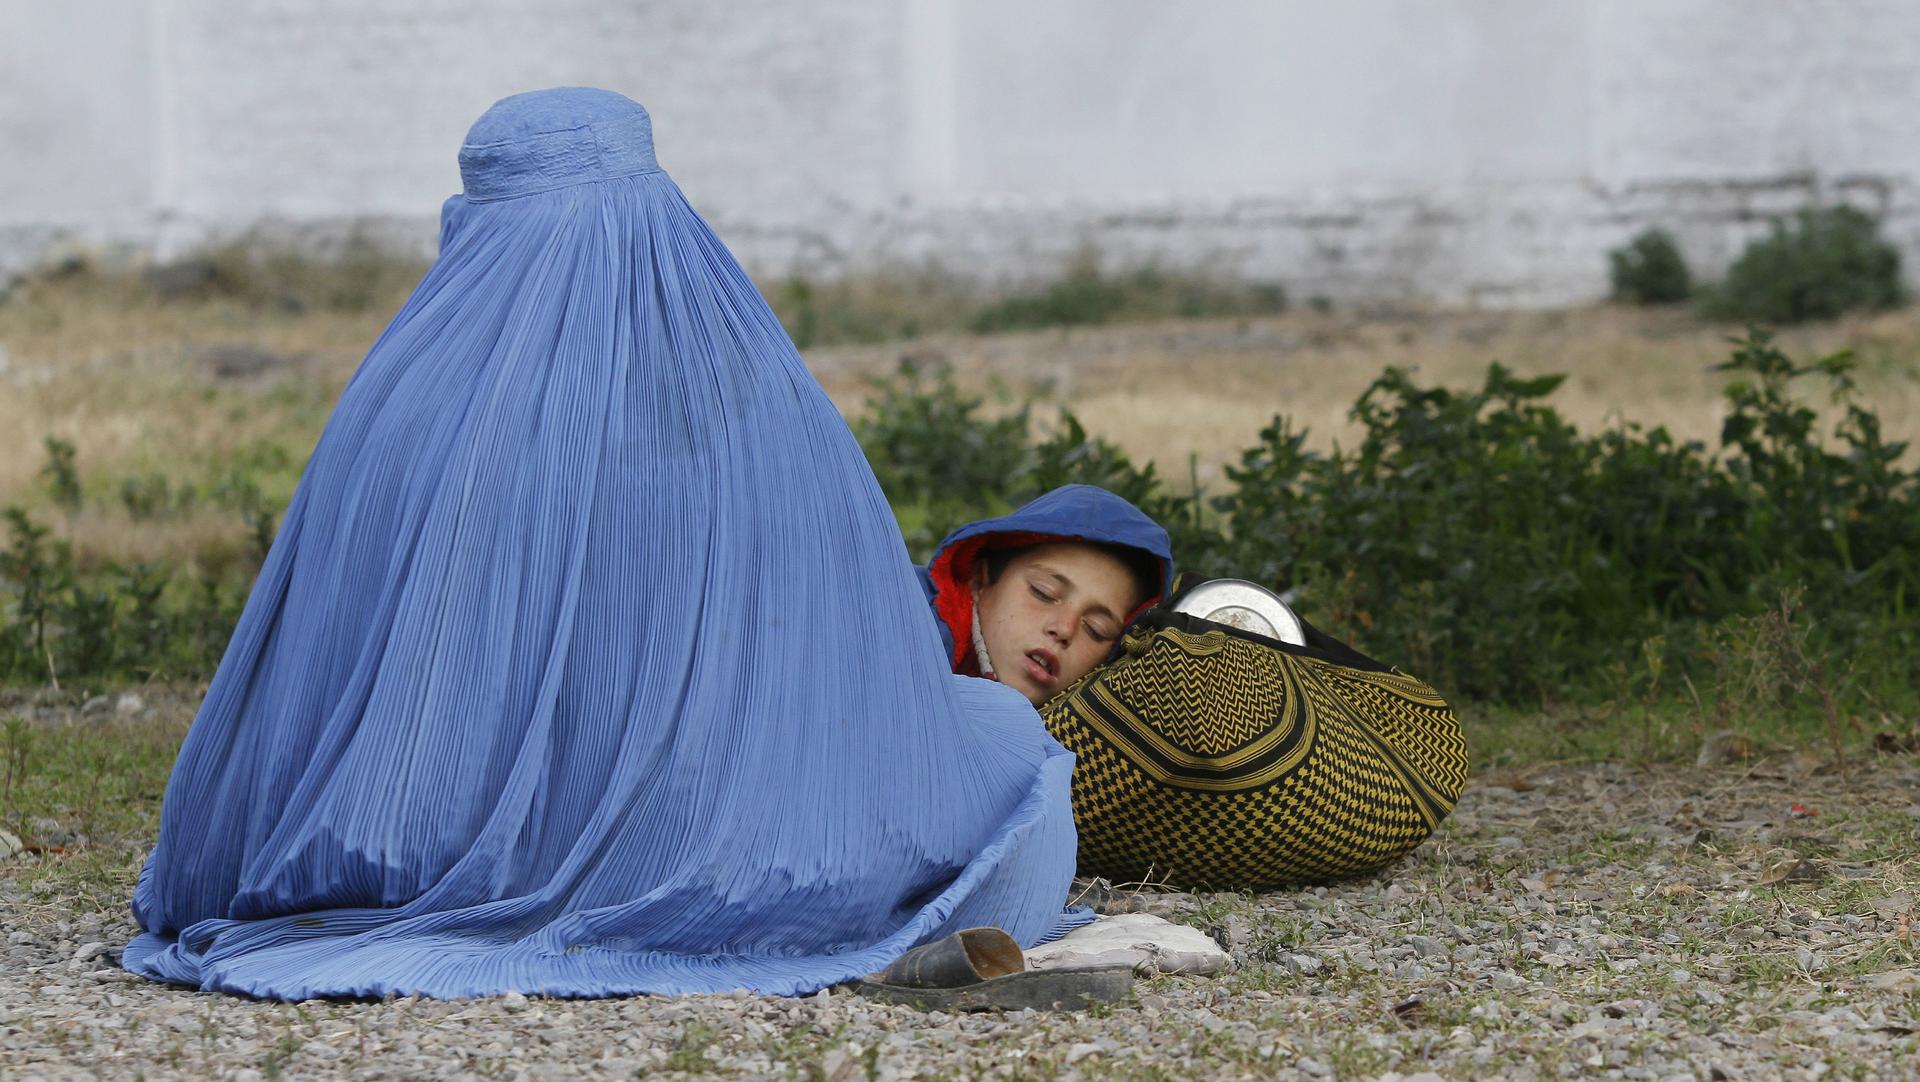 An Afghan refugee woman sits with her sleeping child as they wait with others to be repatriated to Afghanistan, at the United Nations High Commissioner for Refugees office on the outskirts of Peshawar, Pakistan, Feb. 2, 2015.